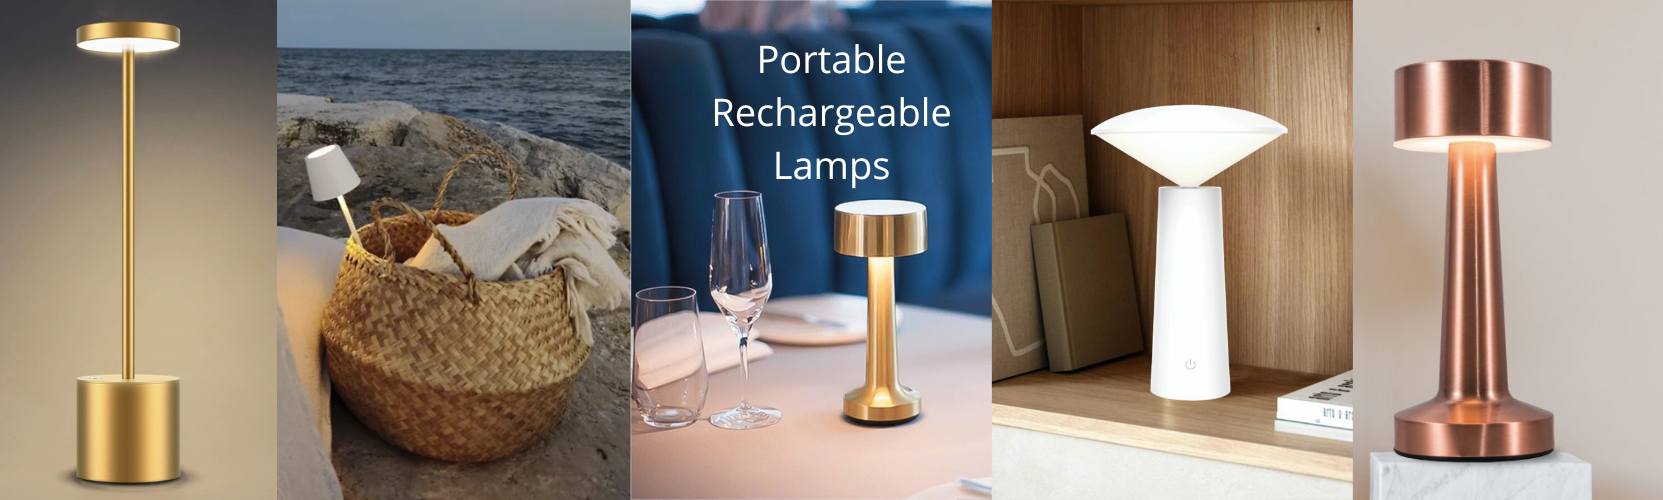 Portable Rechargeable Lamps